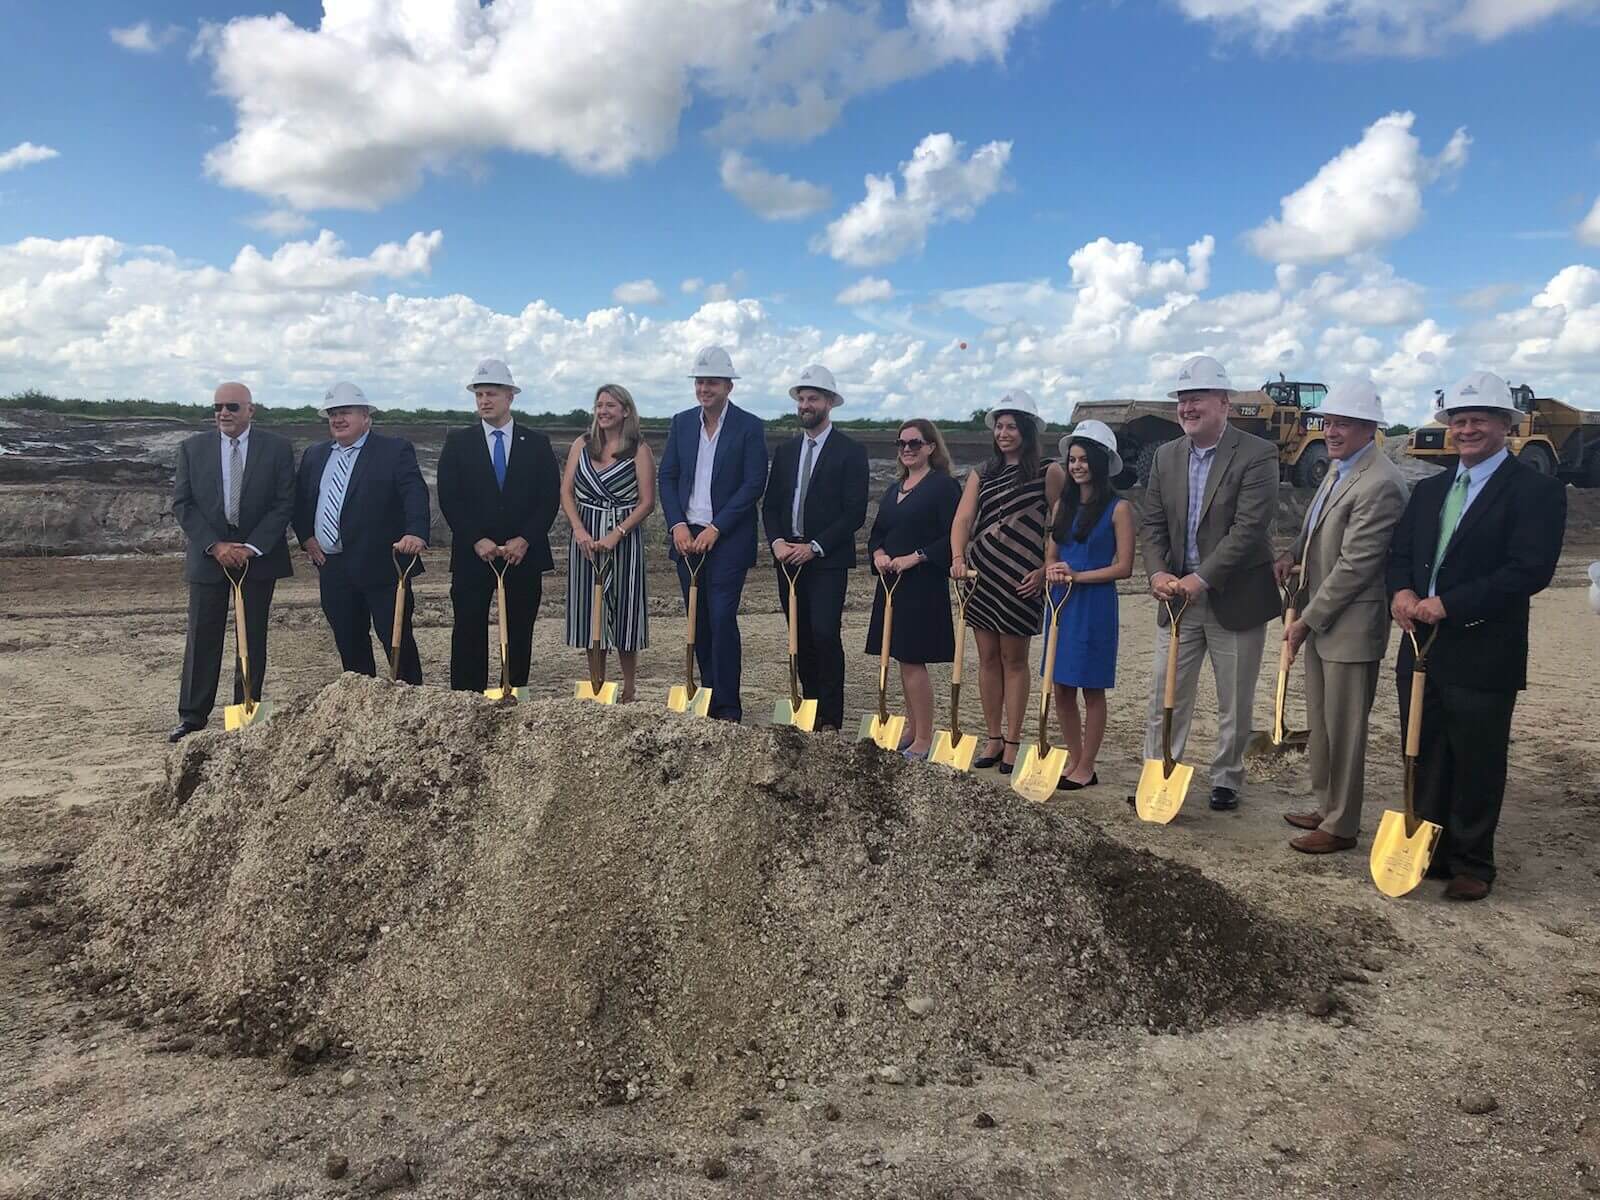 Job Growth Grant Fund Creates 50 New Jobs in Port St. Lucie